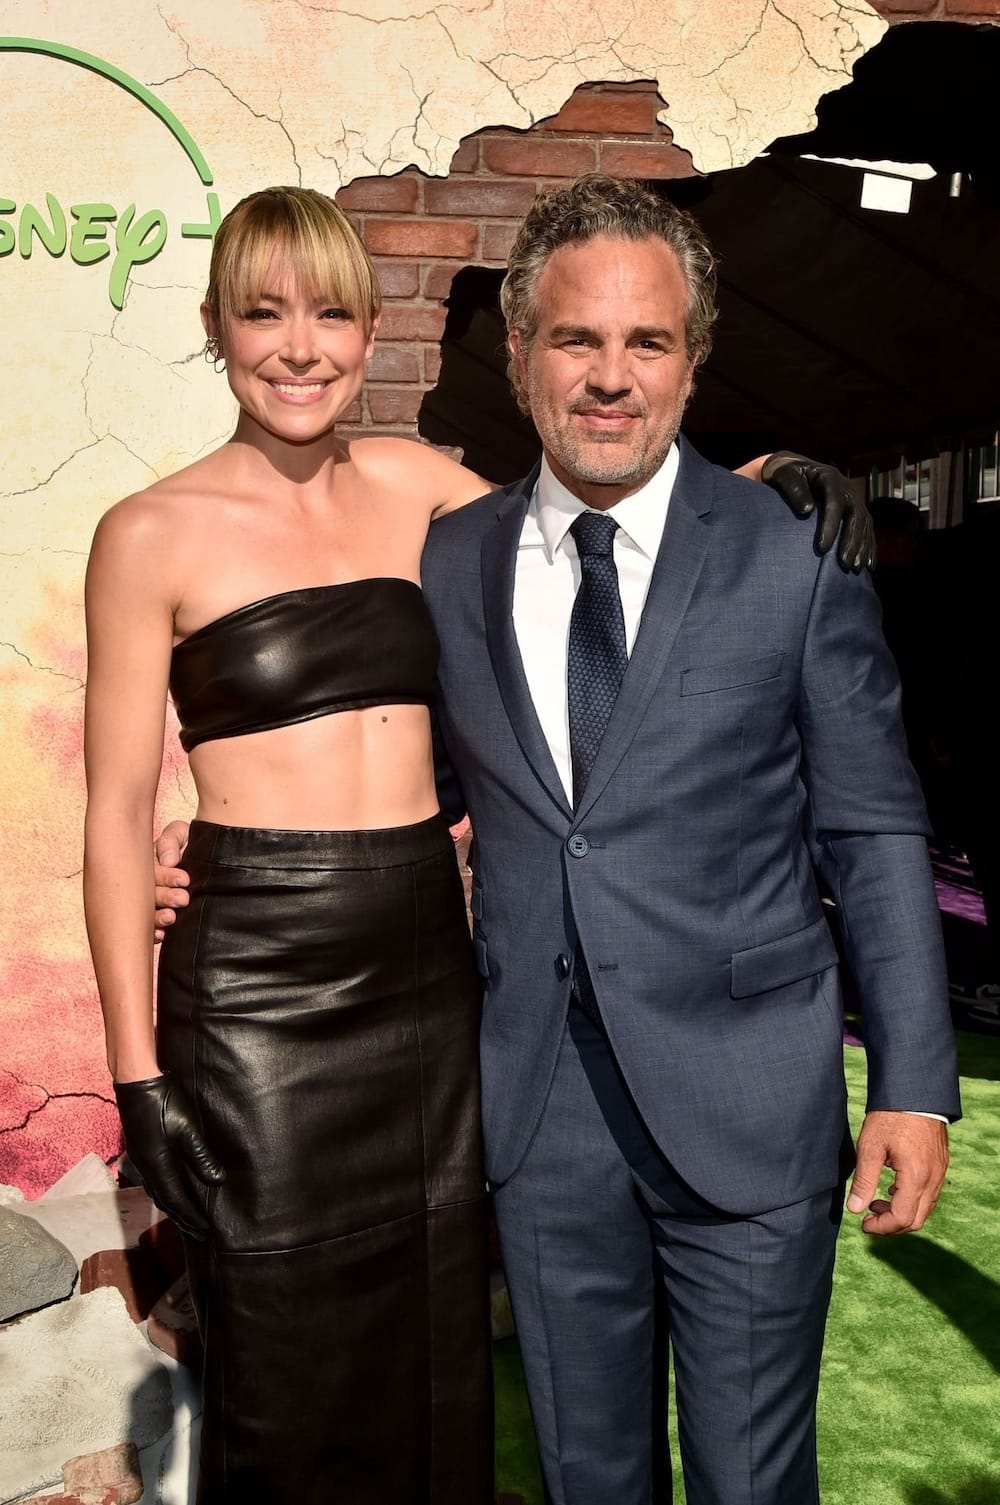 Tatiana Maslany with her She-Hulk Attorney at Law LA co-star Mark Ruffalo at the Los Angeles Premiere on August 15, 2022.